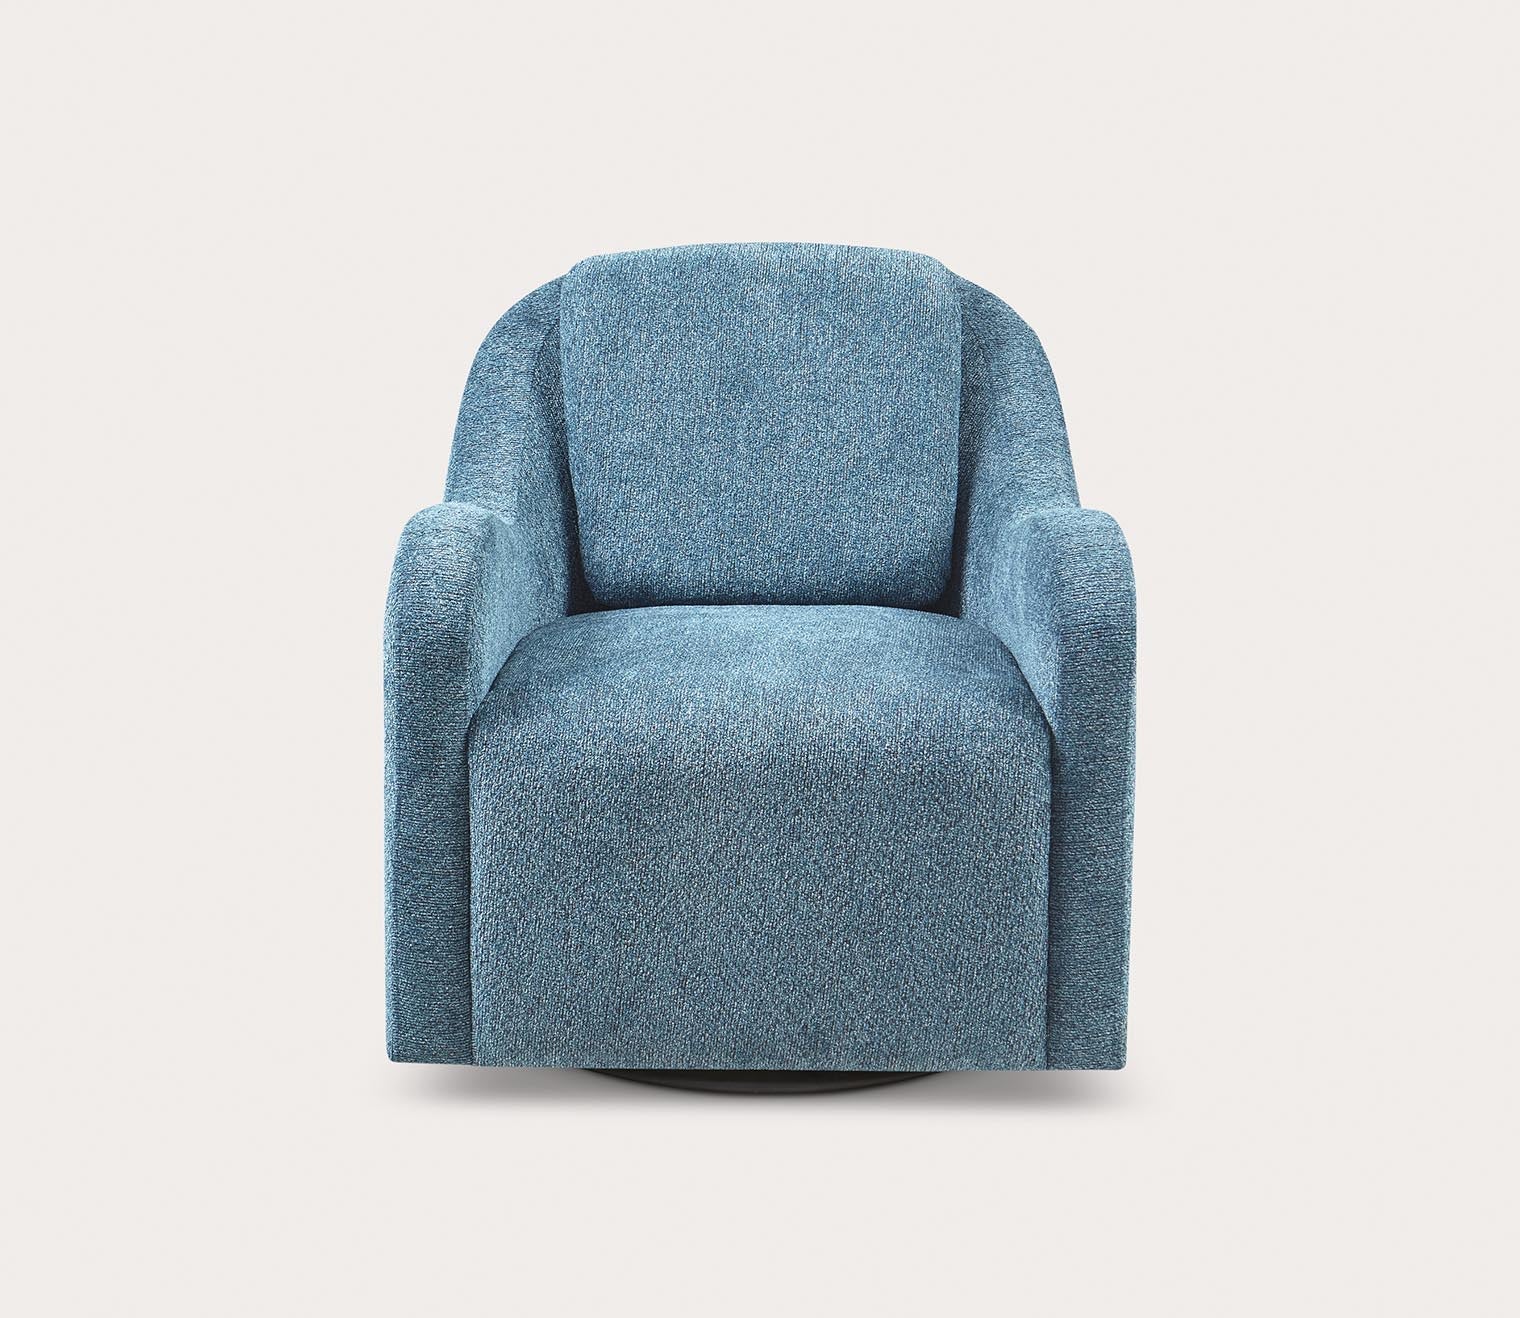 Westerly Swivel Accent Chair by Madison Park